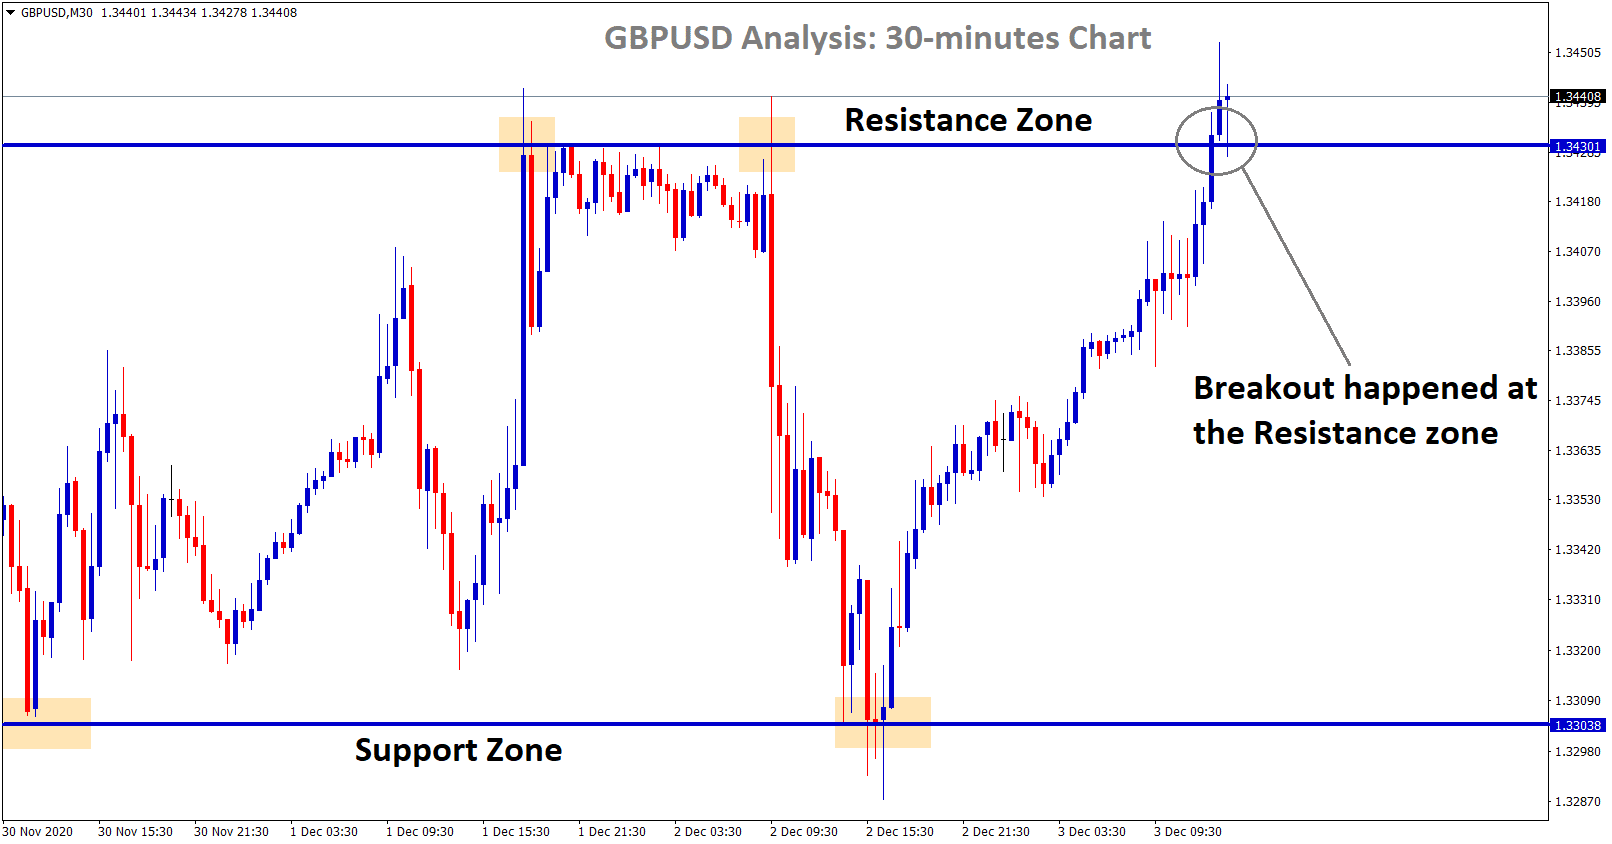 gbpusd broken the resistance zone in the 30 minutes chart